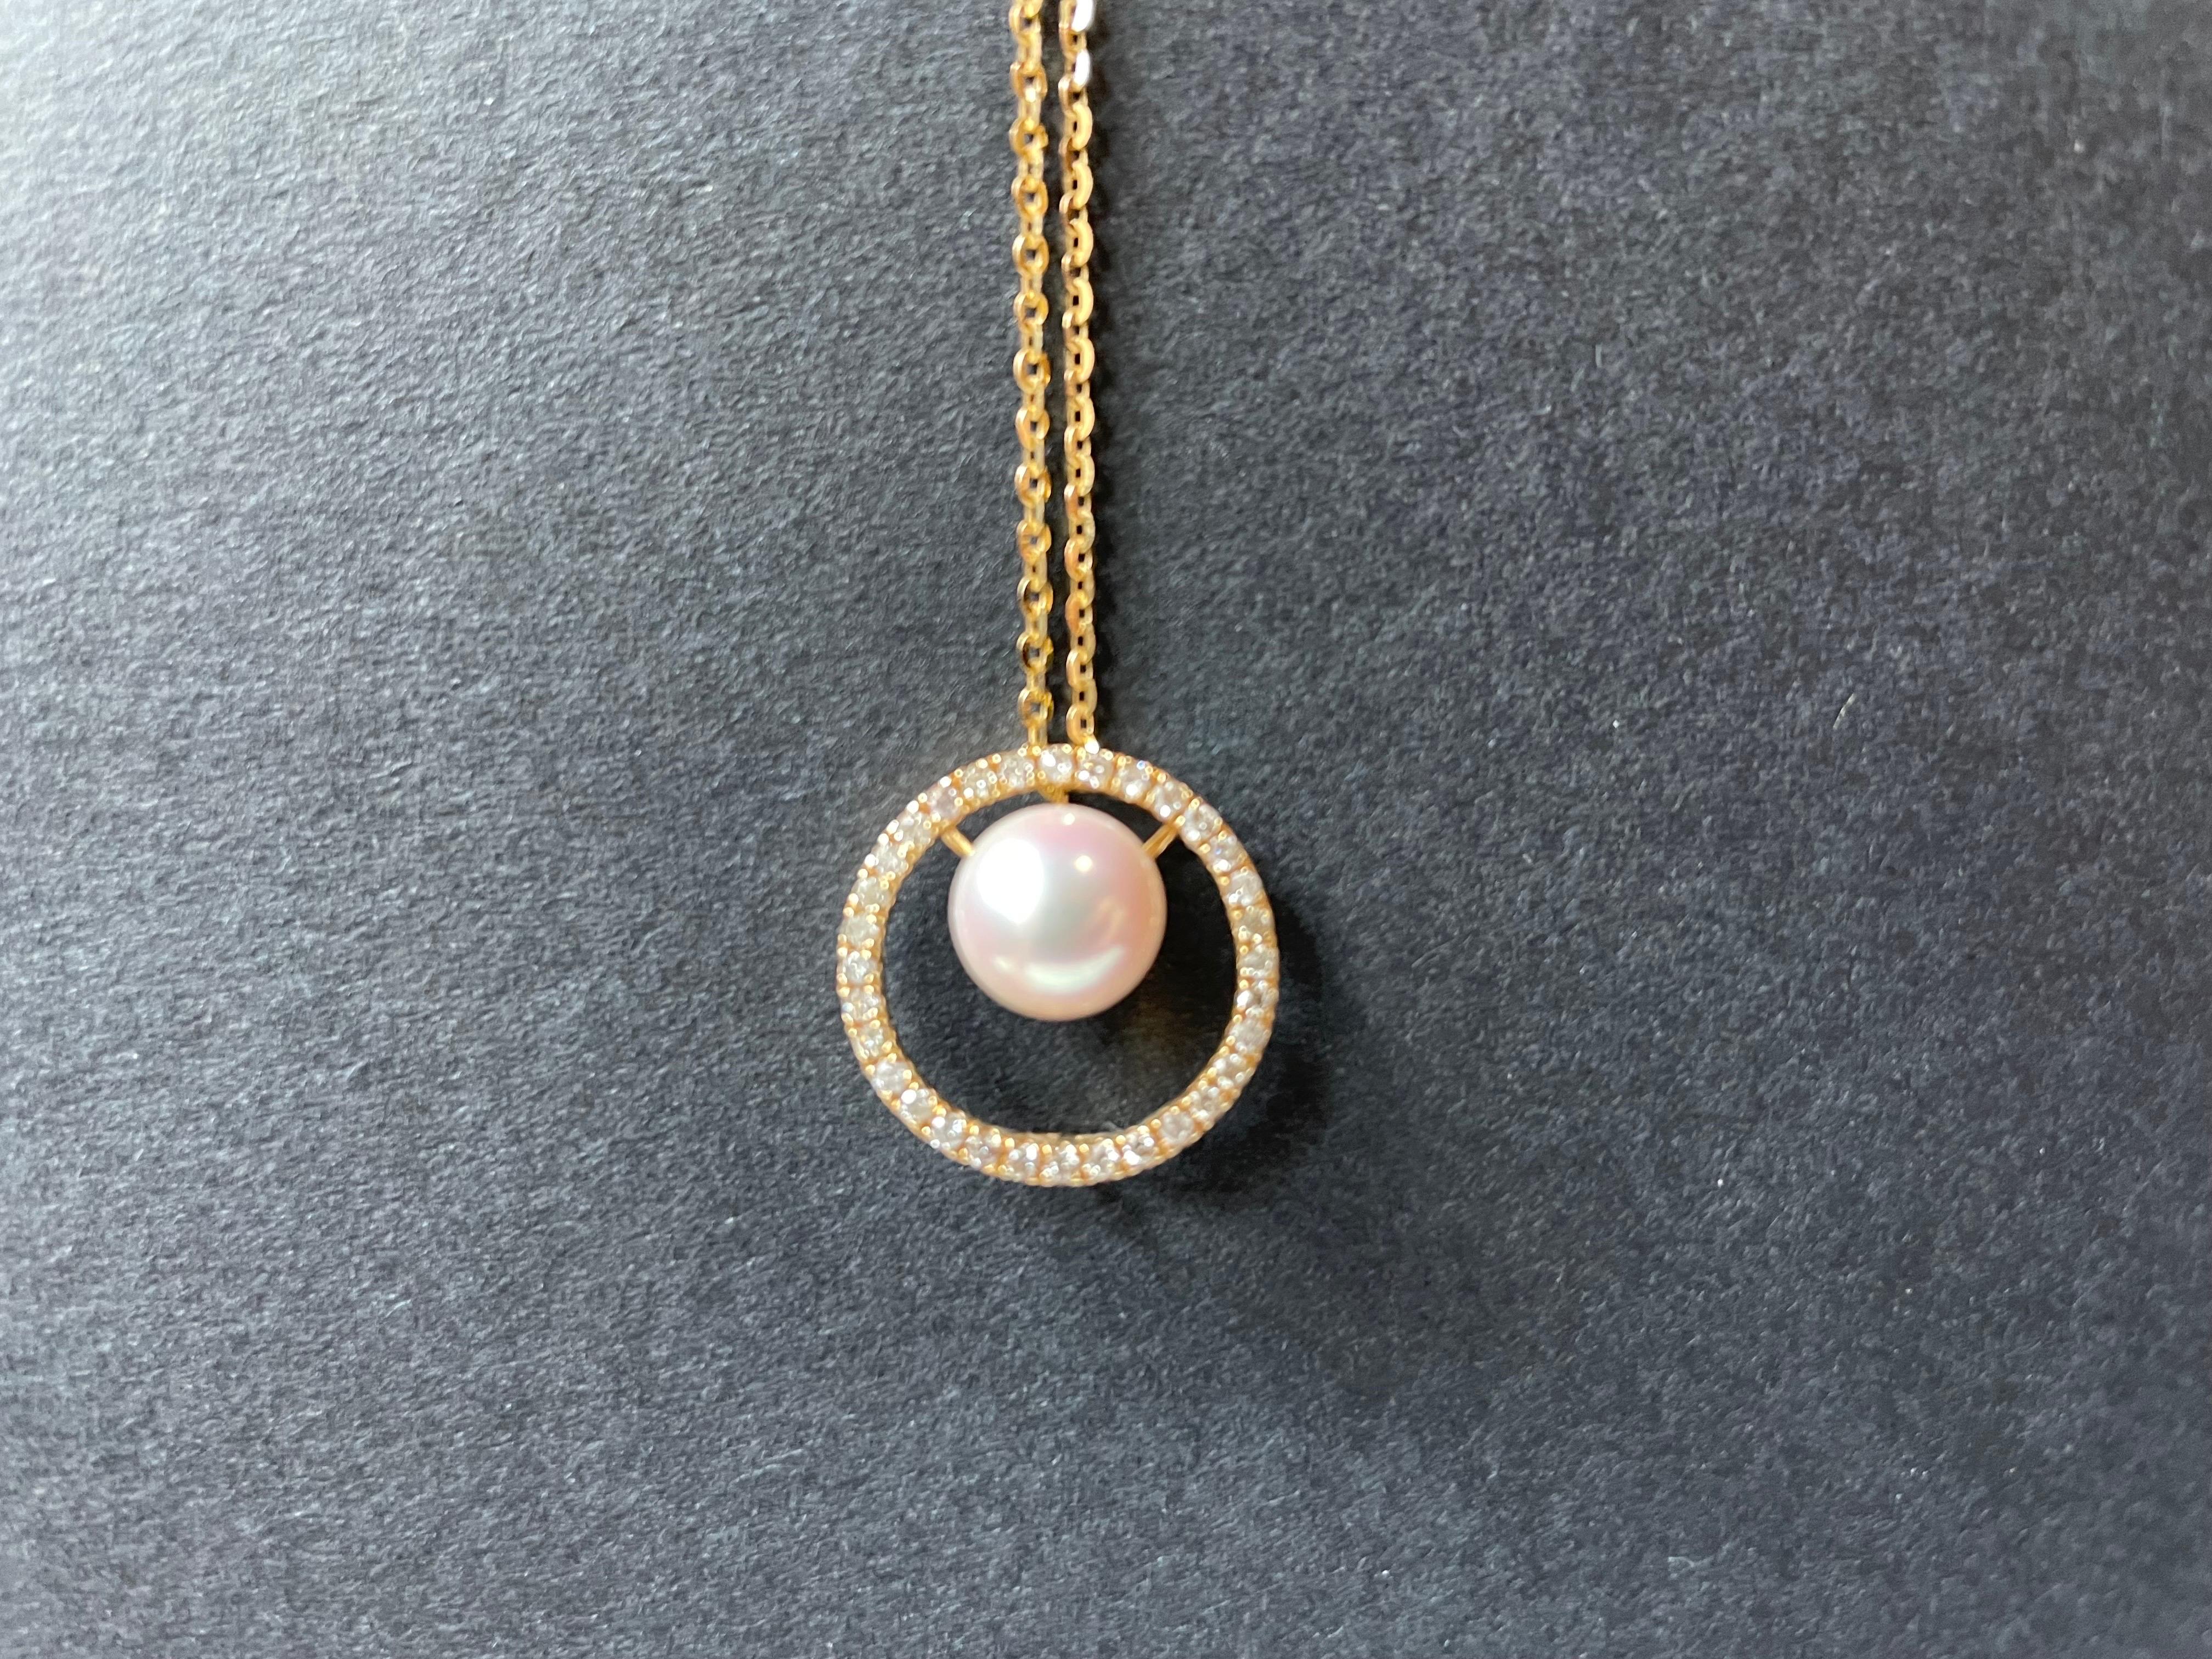 A simple and modern diamond pendant set with a natural Japanese Akoya delicately arranged in just the right place. The brilliant pearl is set in 18k gold and diamonds, offering a classic and timeless modern styling. The pendant can be worn in two